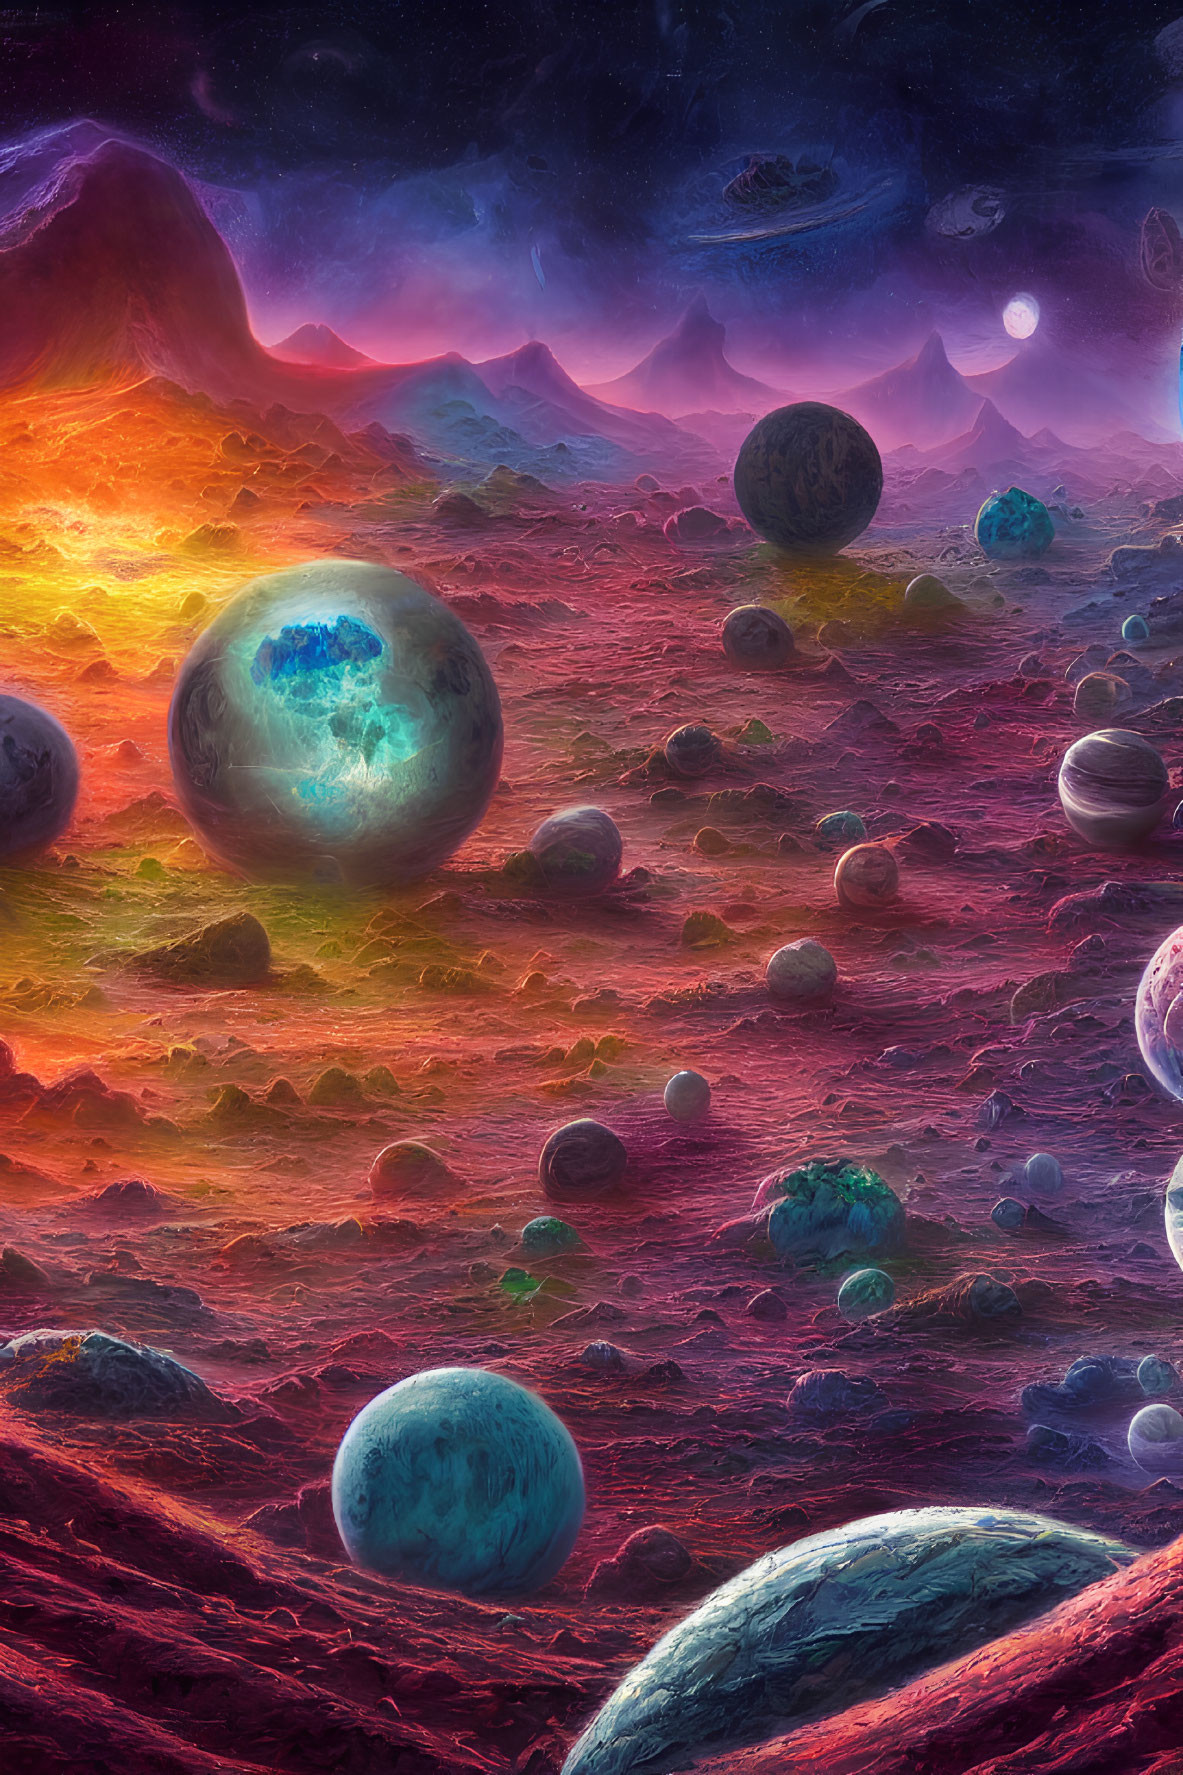 Colorful Alien Landscape with Glowing Celestial Bodies and Nebula-Filled Sky